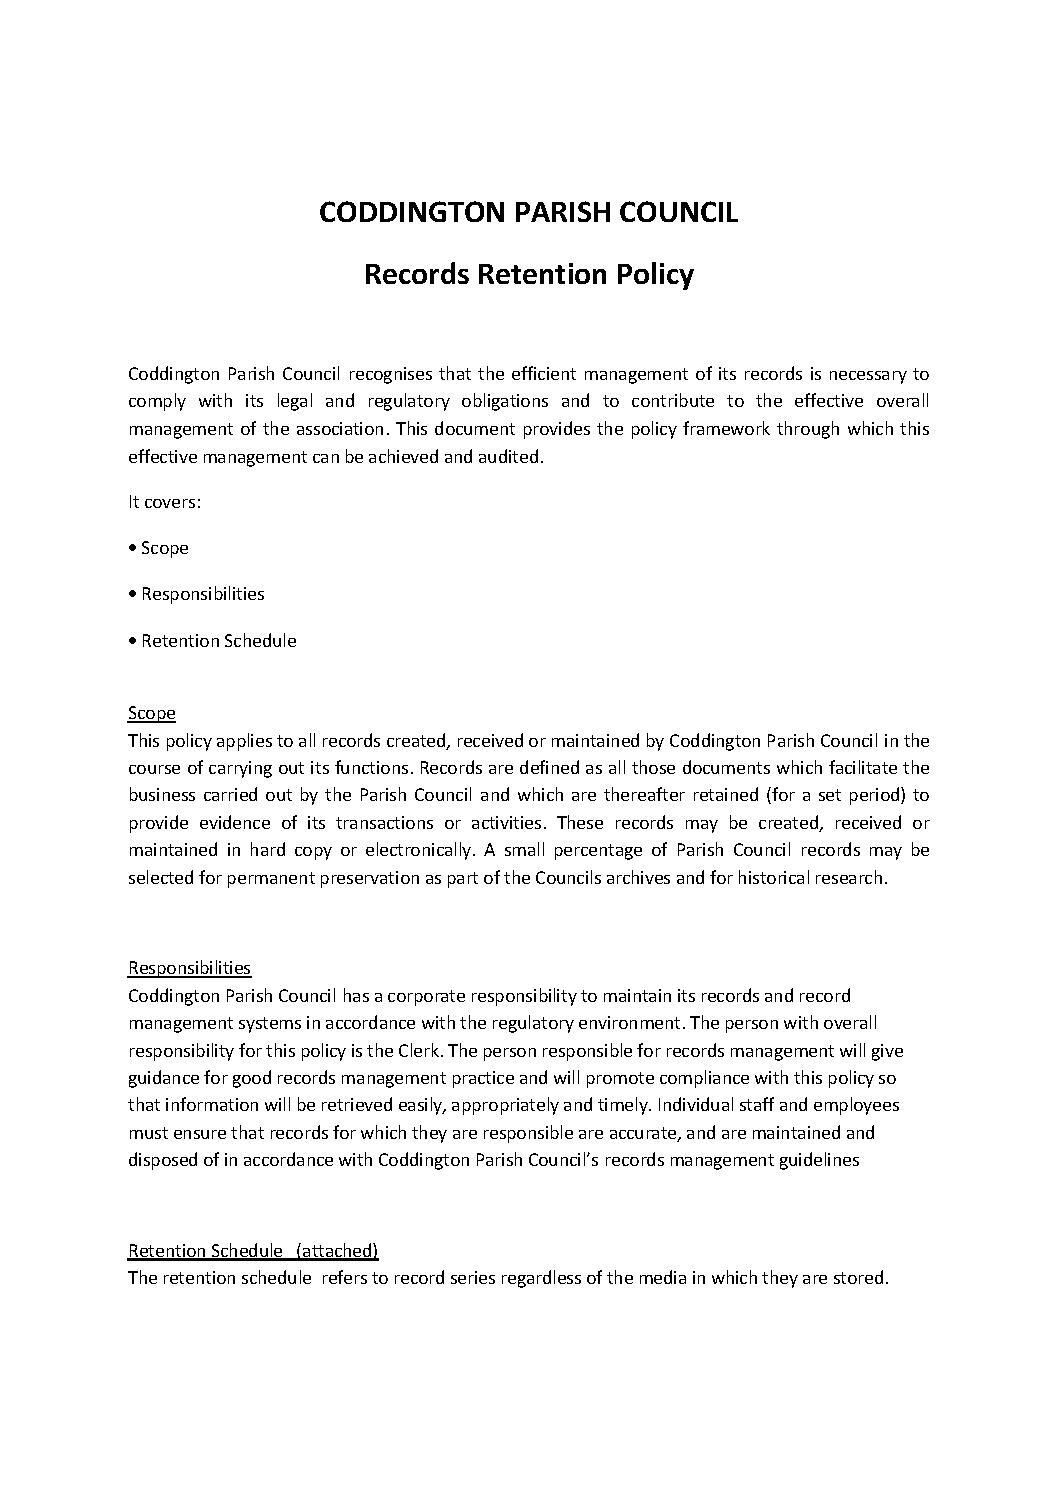 Records Retention Policy